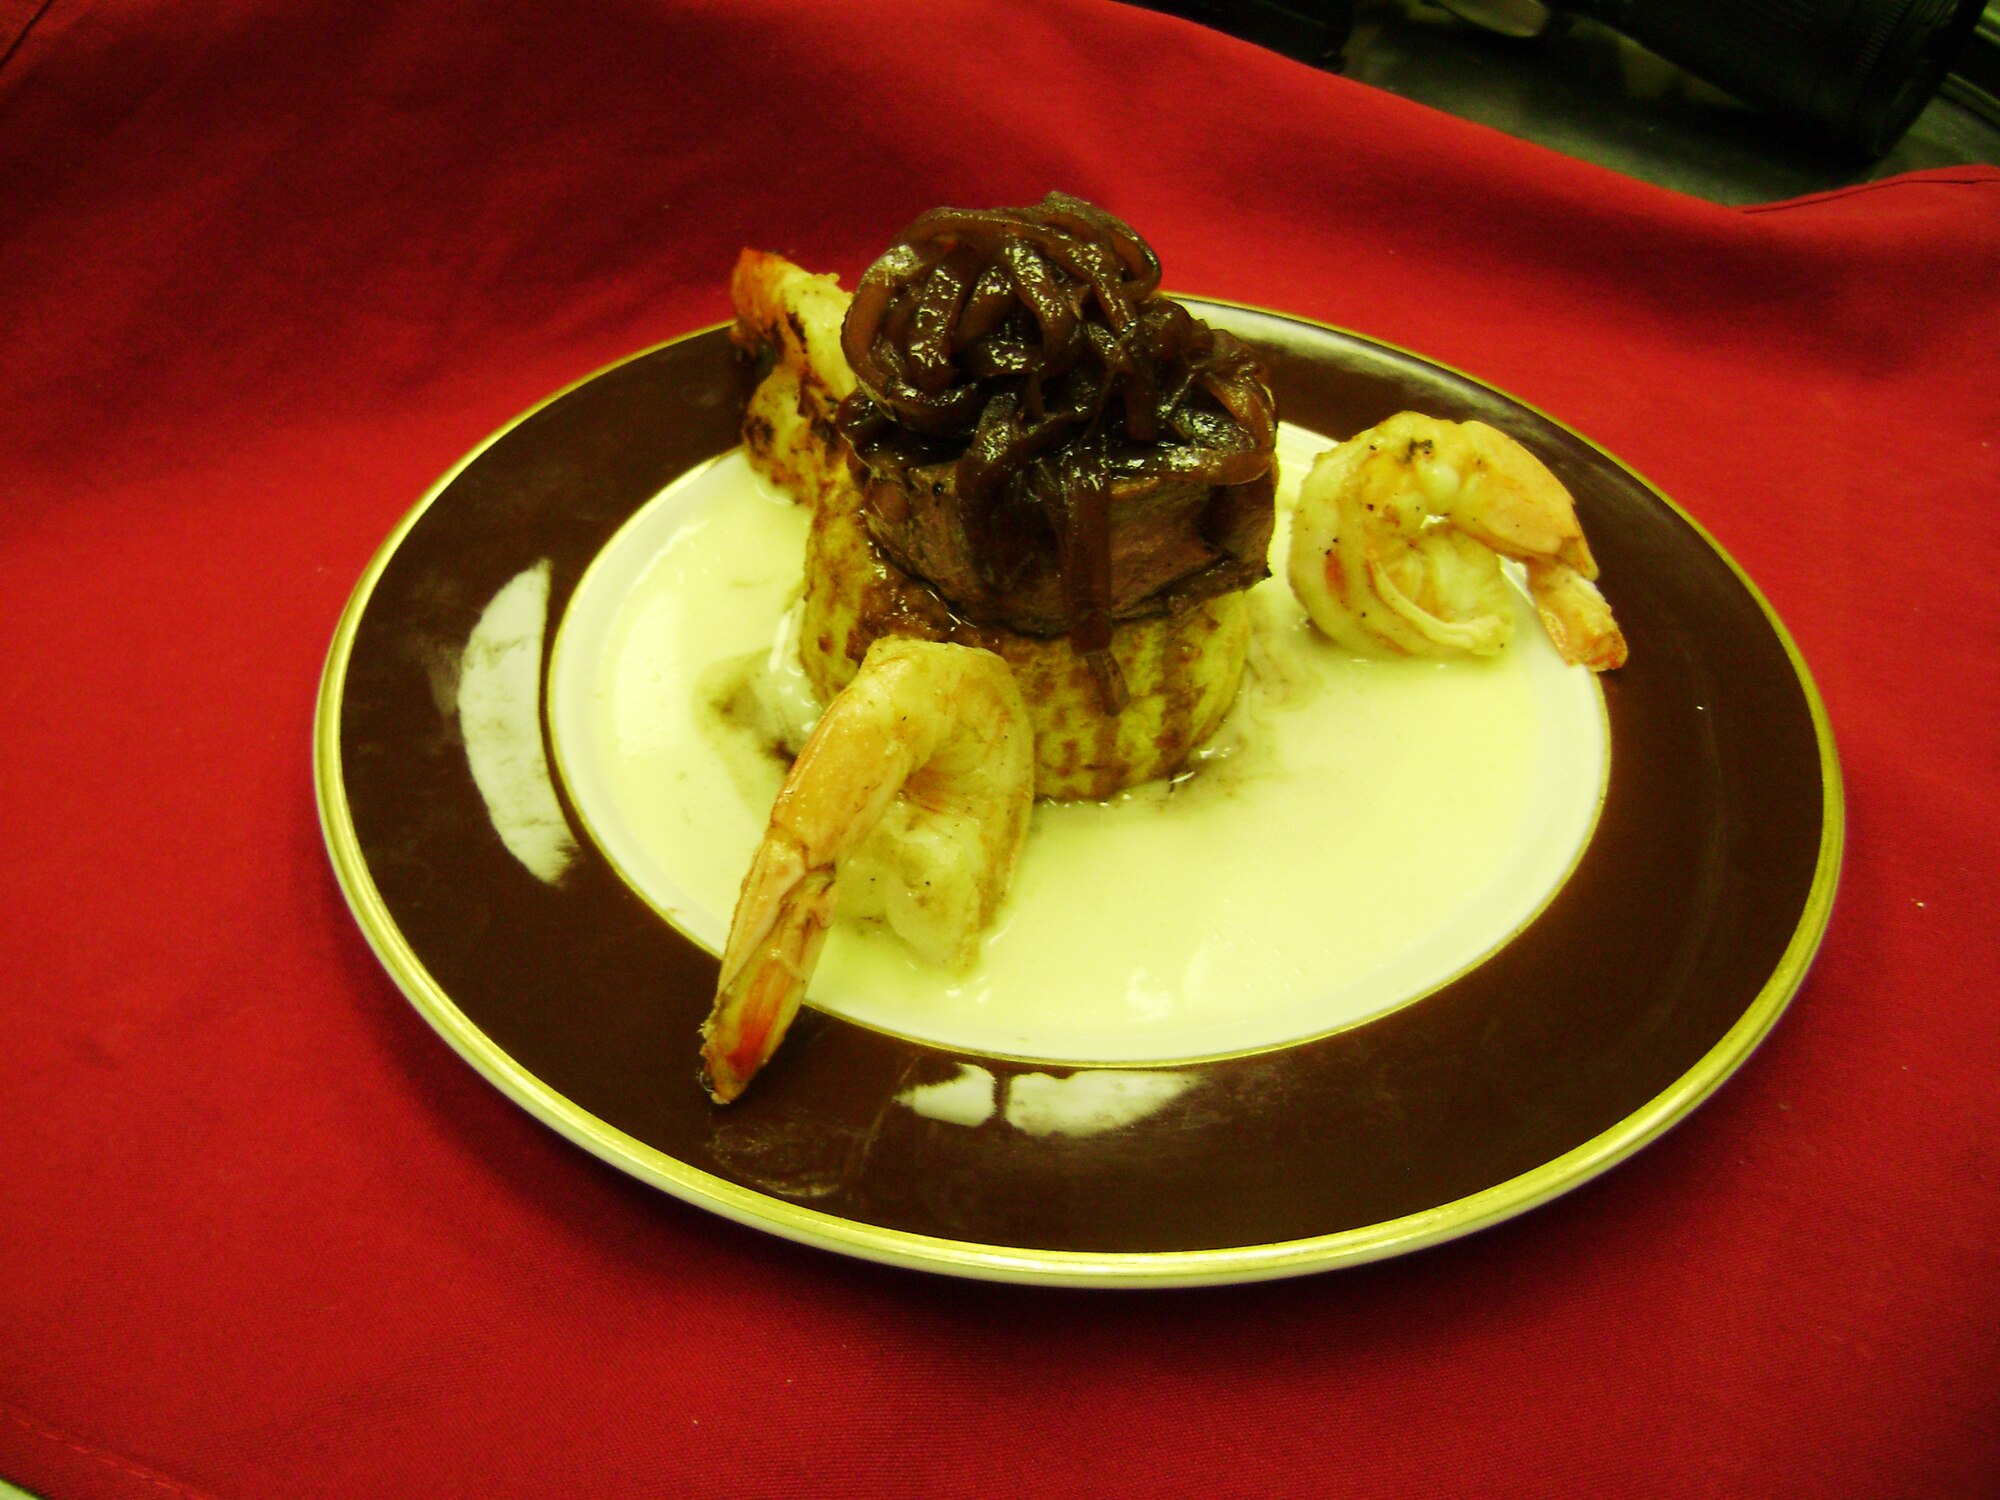 Filet mignon nestled in a bed of prawns, surrounded by a potato torte, red onion marmalade and steamed asparagus is served at the Sheppard Club April 17 during the Great Gatsby Gala: Fabulous French Feast. This is the beginning of many new events that will be held at the Sheppard Club. (U.S. Air Force/Rhonda Royer)

